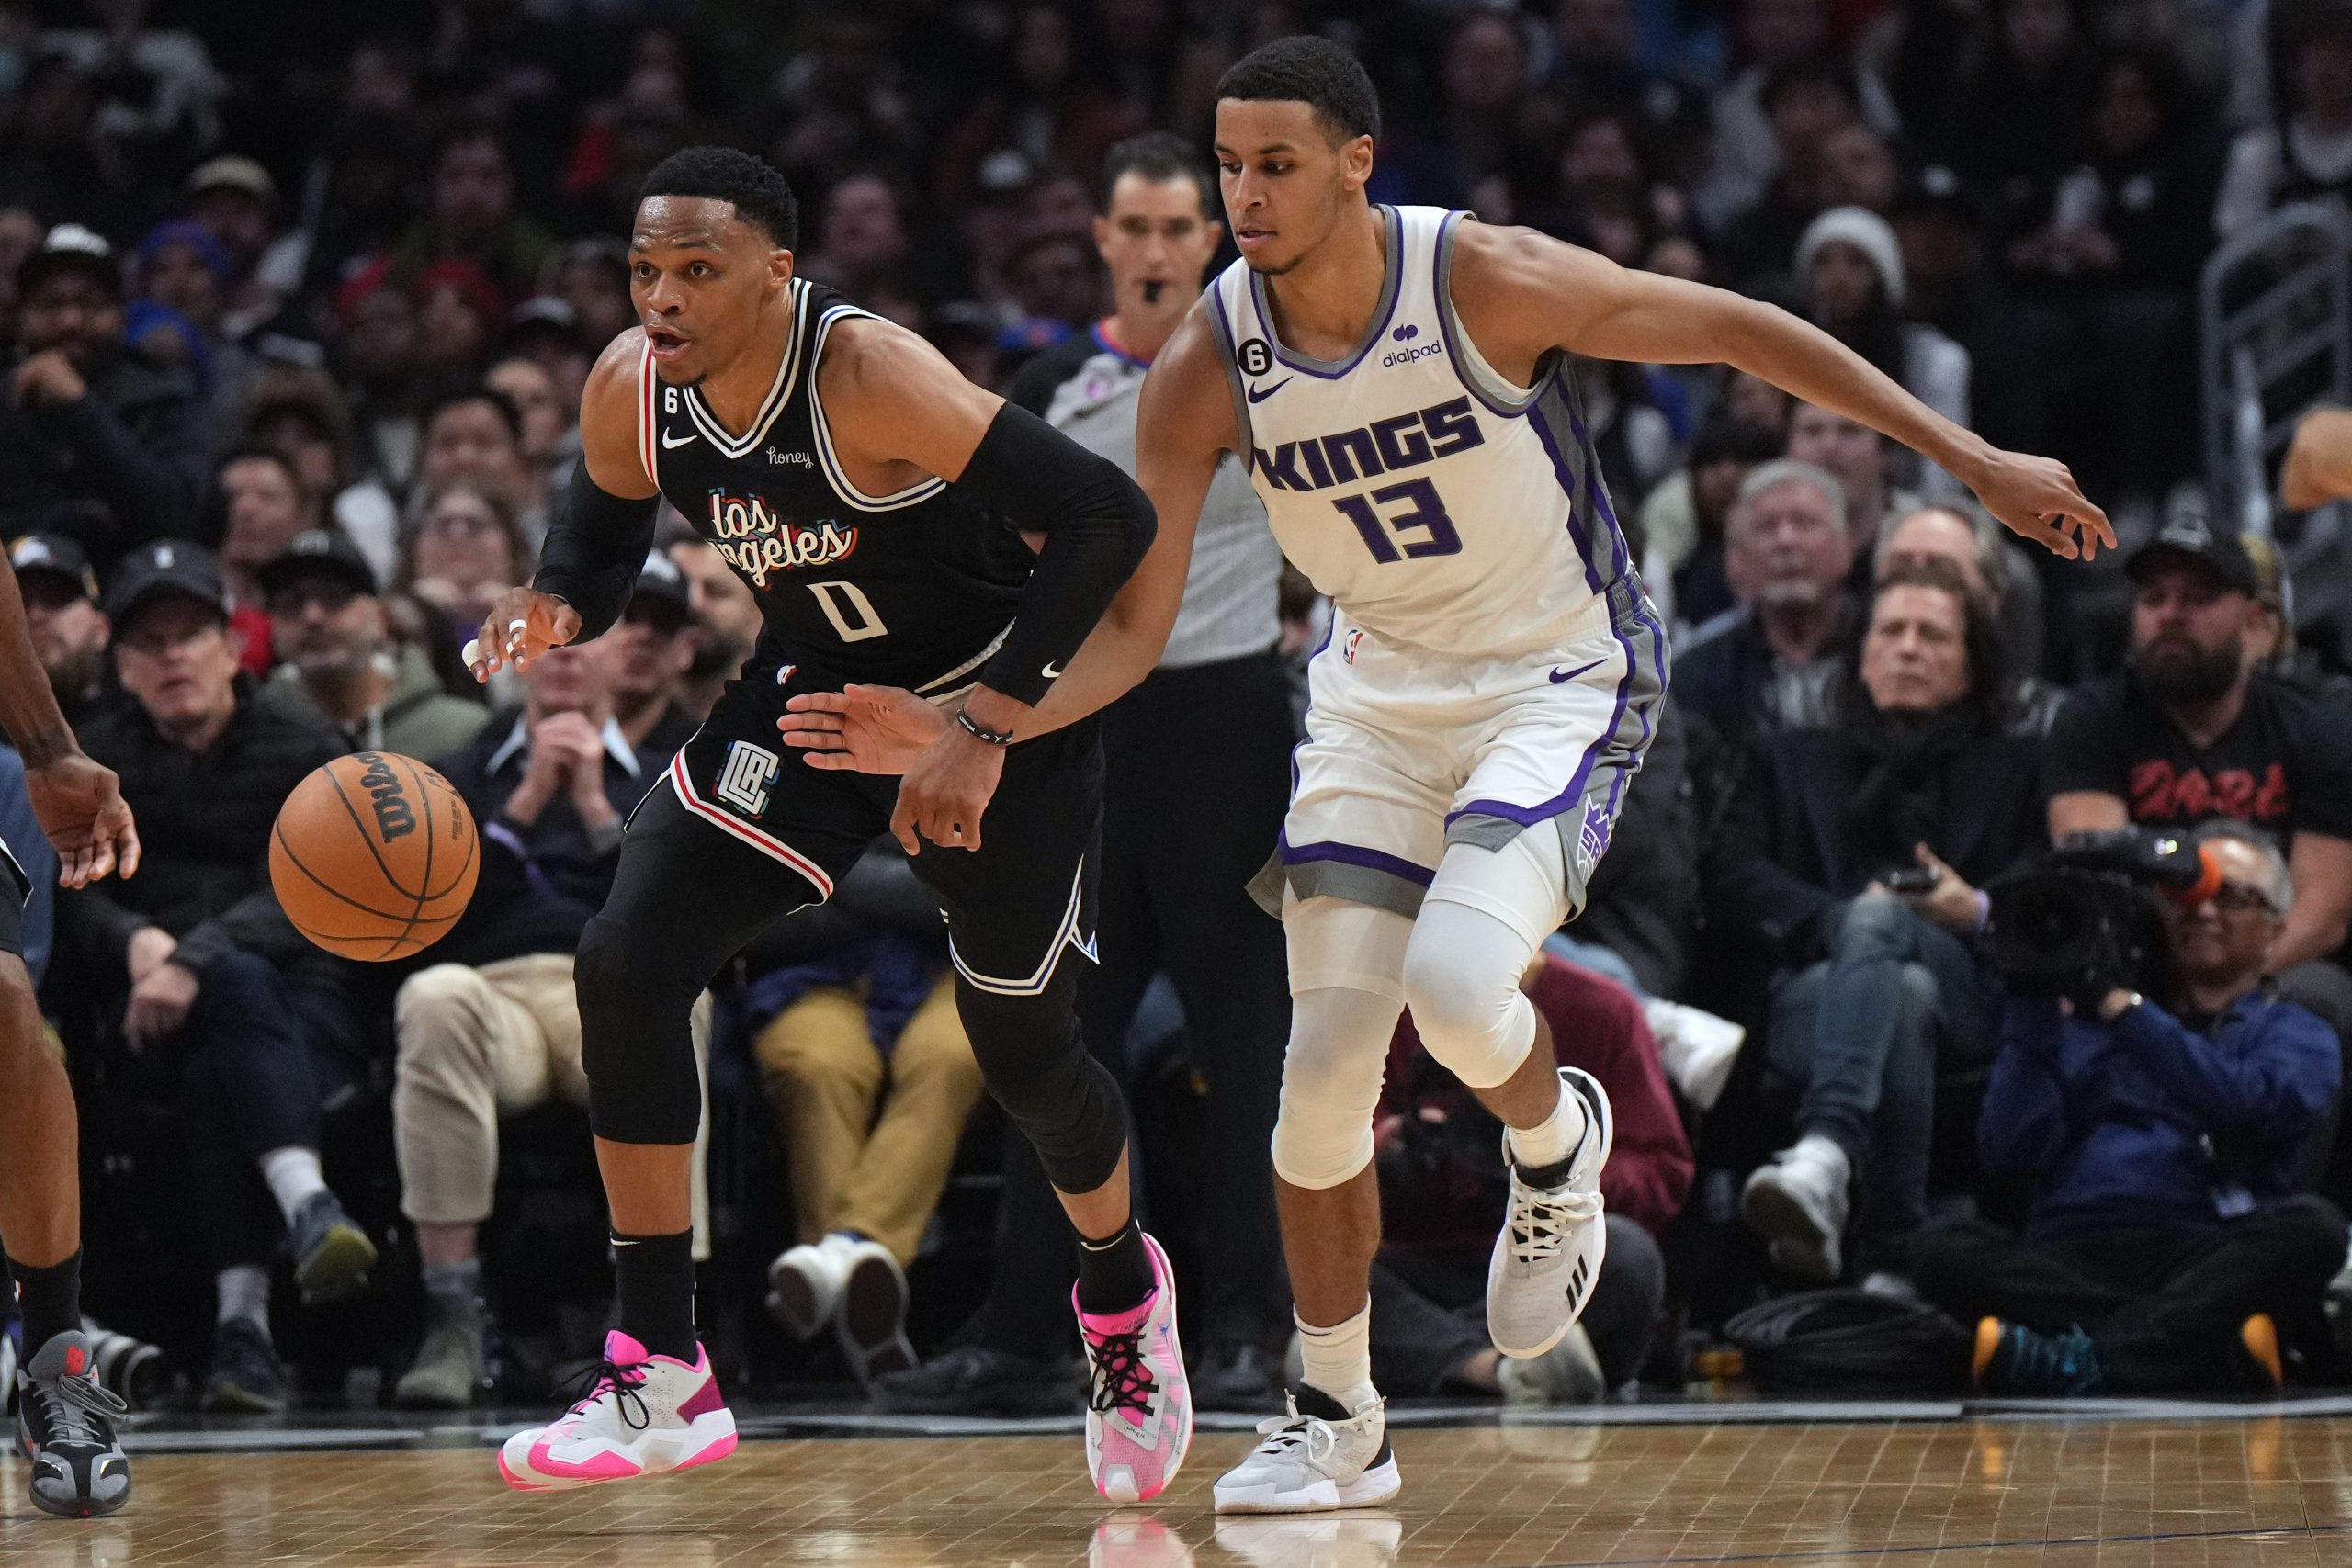 Feb 24, 2023; Los Angeles, California, USA; LA Clippers guard Russell Westbrook (0) and Sacramento Kings forward Keegan Murray (13) battle for the ball in the second half at Crypto.com Arena. The Kings defeated the Clippers 176-175 in double overtime. Mandatory Credit: Kirby Lee-USA TODAY Sports Photo: Kirby Lee/REUTERS